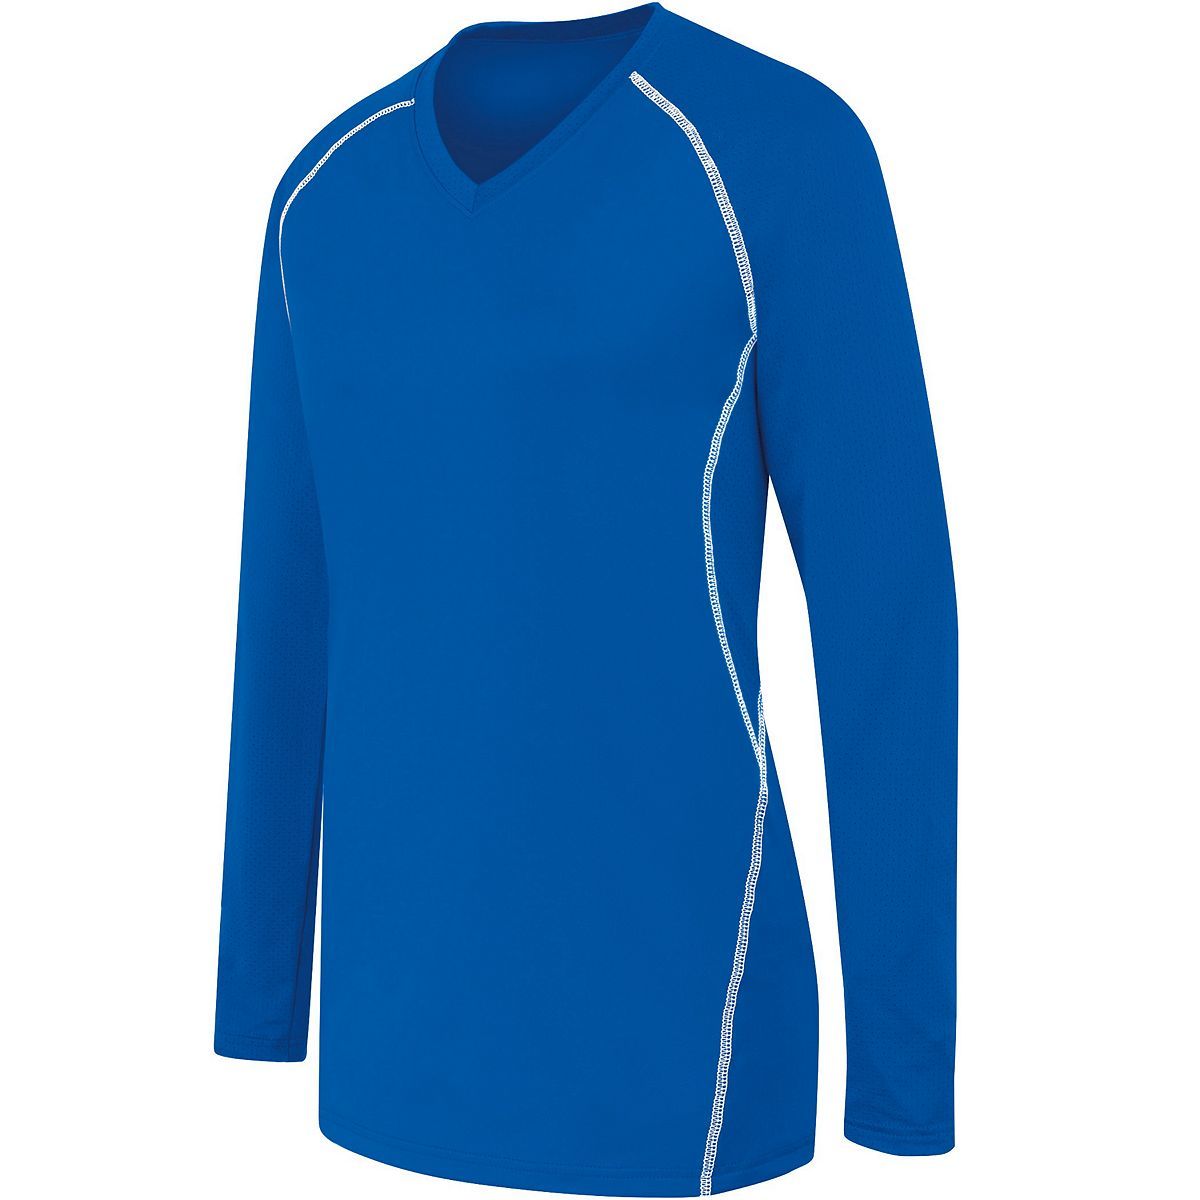 High 5 Ladies Long Sleeve Solid Jersey in Royal/White  -Part of the Ladies, Ladies-Jersey, High5-Products, Volleyball, Shirts product lines at KanaleyCreations.com